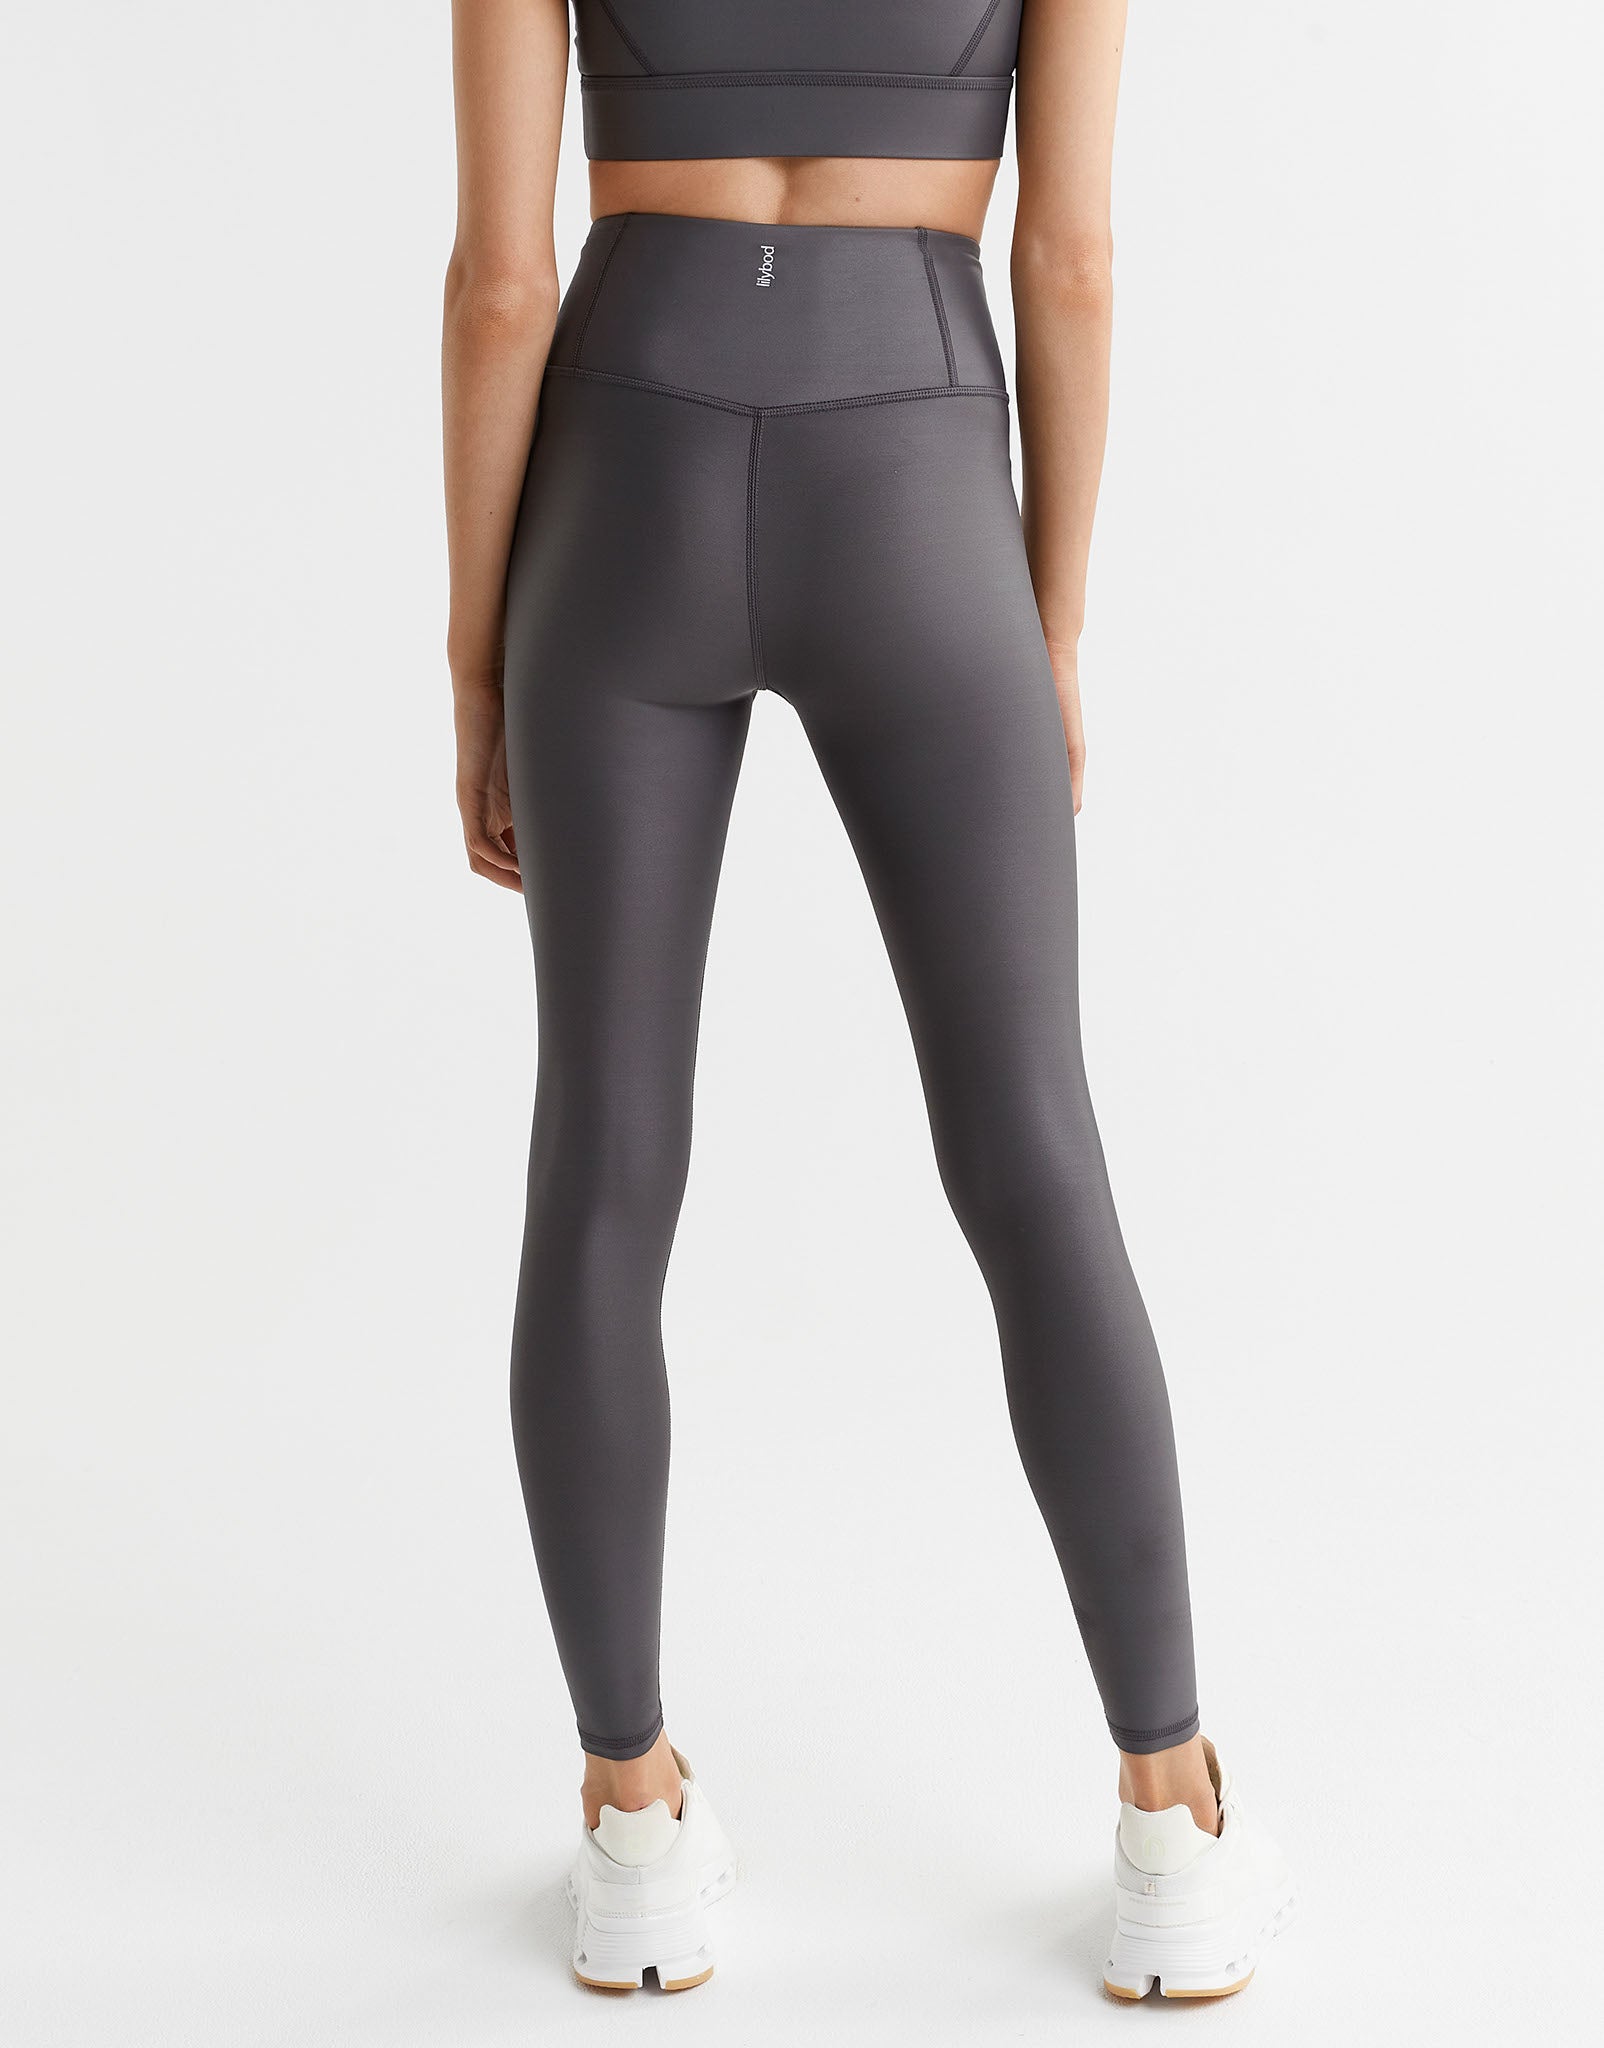 Lilybod-Storm-Legging-Mineral-All-Over-Wet-Look-LL125-MWL-5.jpeg